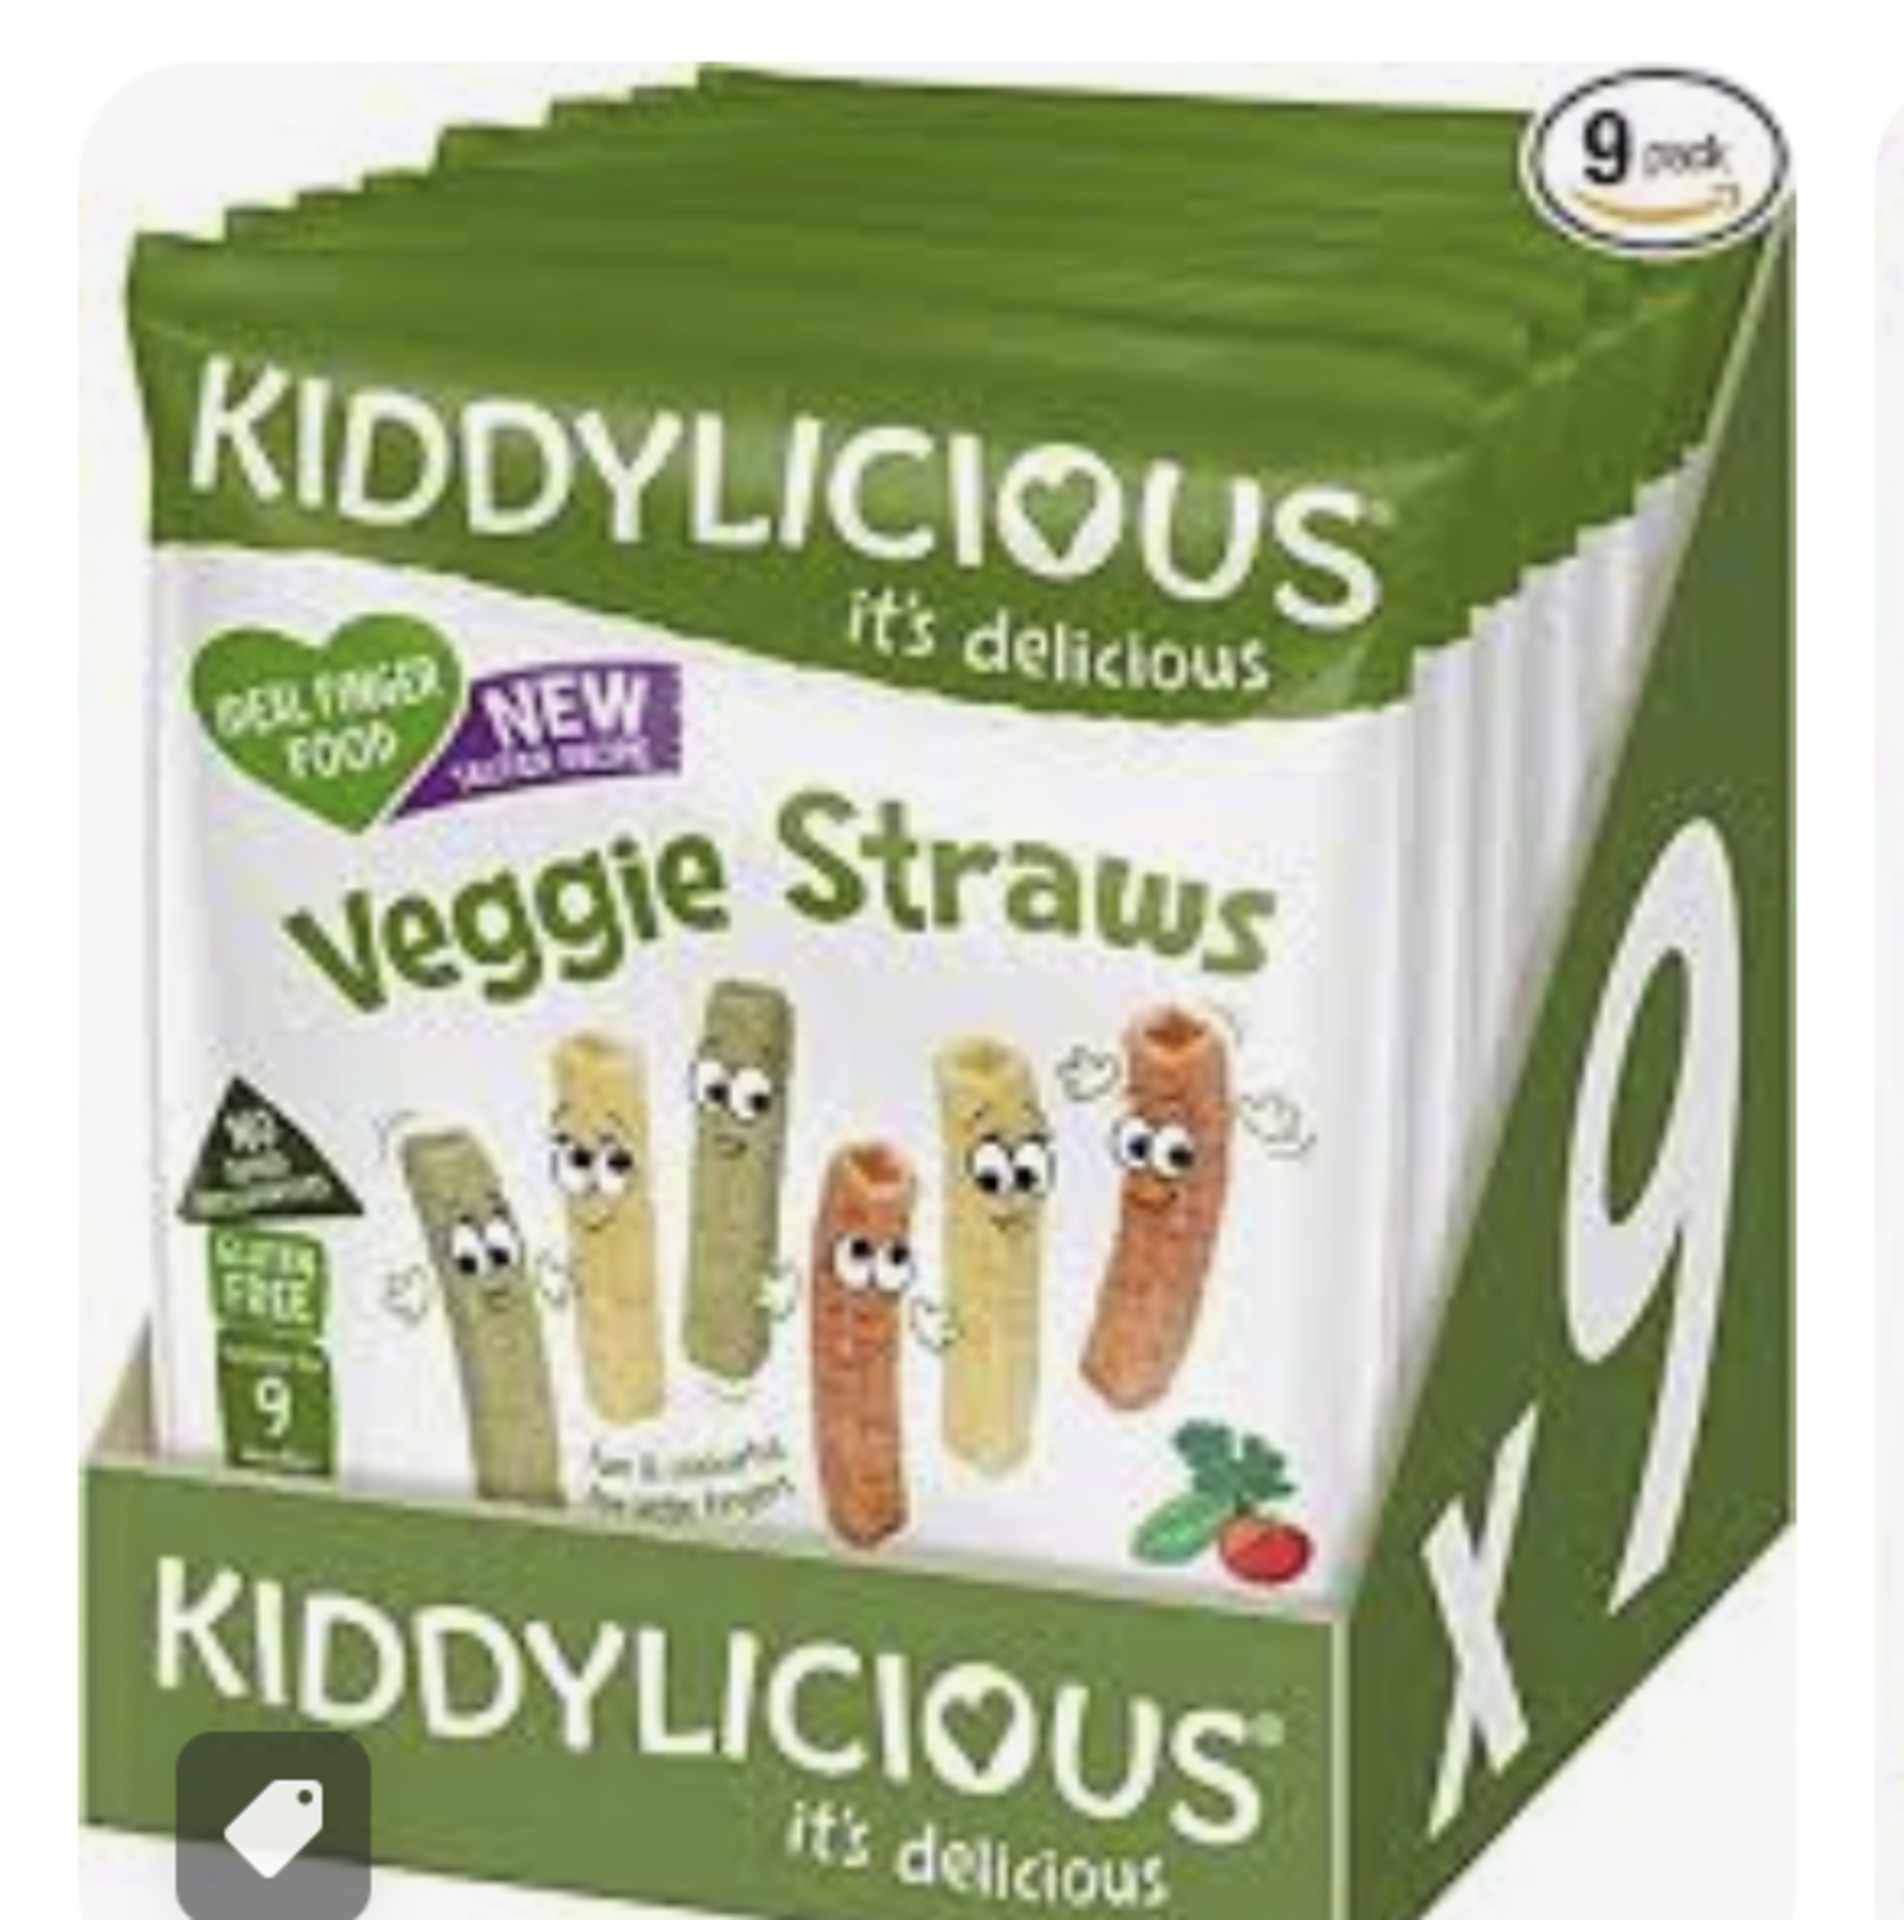 RRP £1180 (Count 94) Spw44E2528V Kiddylicious Veggie Straws - Delicious Finger Food Kids Snack -